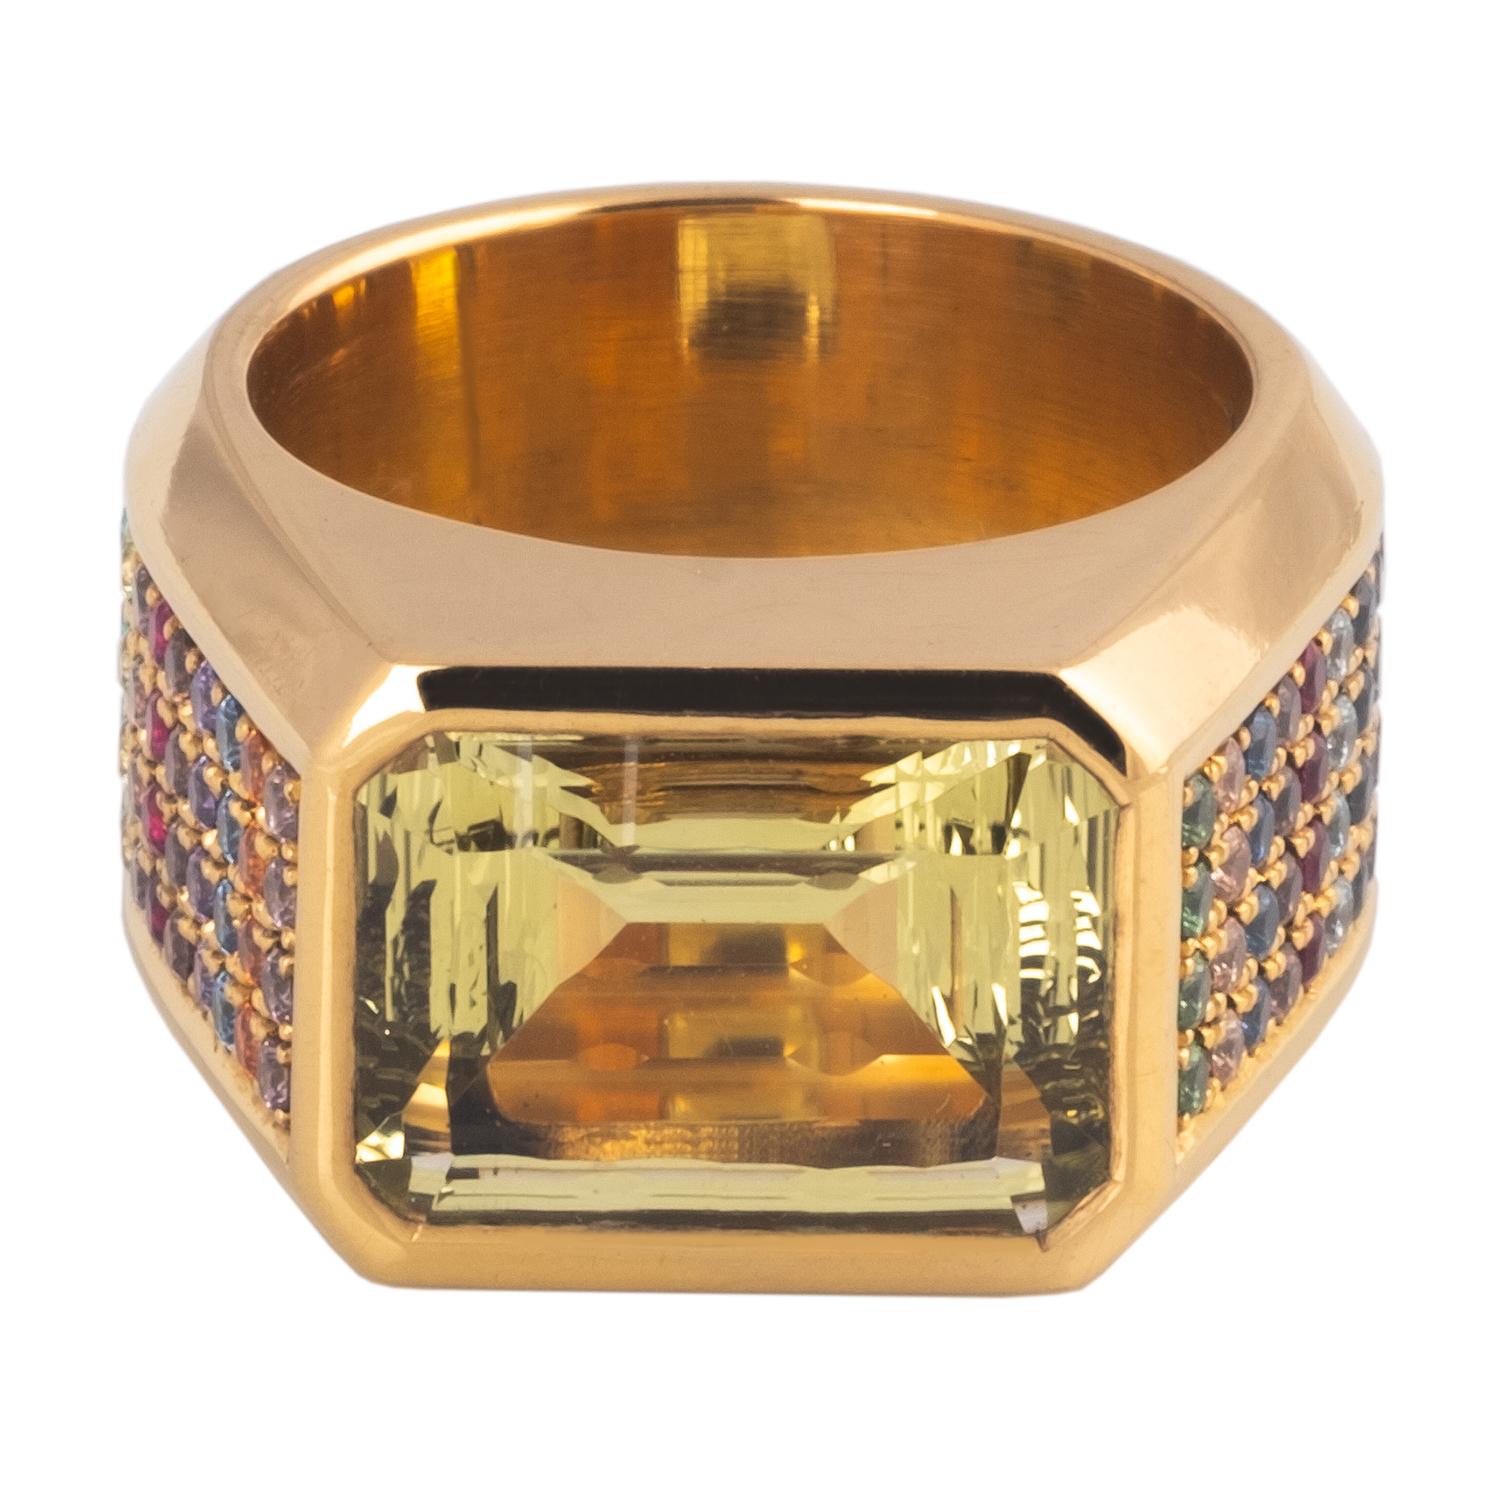 A rainbow of gemstones wrap around this yellow gold ring set with a beautifully cut citrine.

Sapphires come is almost all colers so we used every beautiful shade of purple, orange, yellow, blue and pink. The tsavorties add some lovely shades of